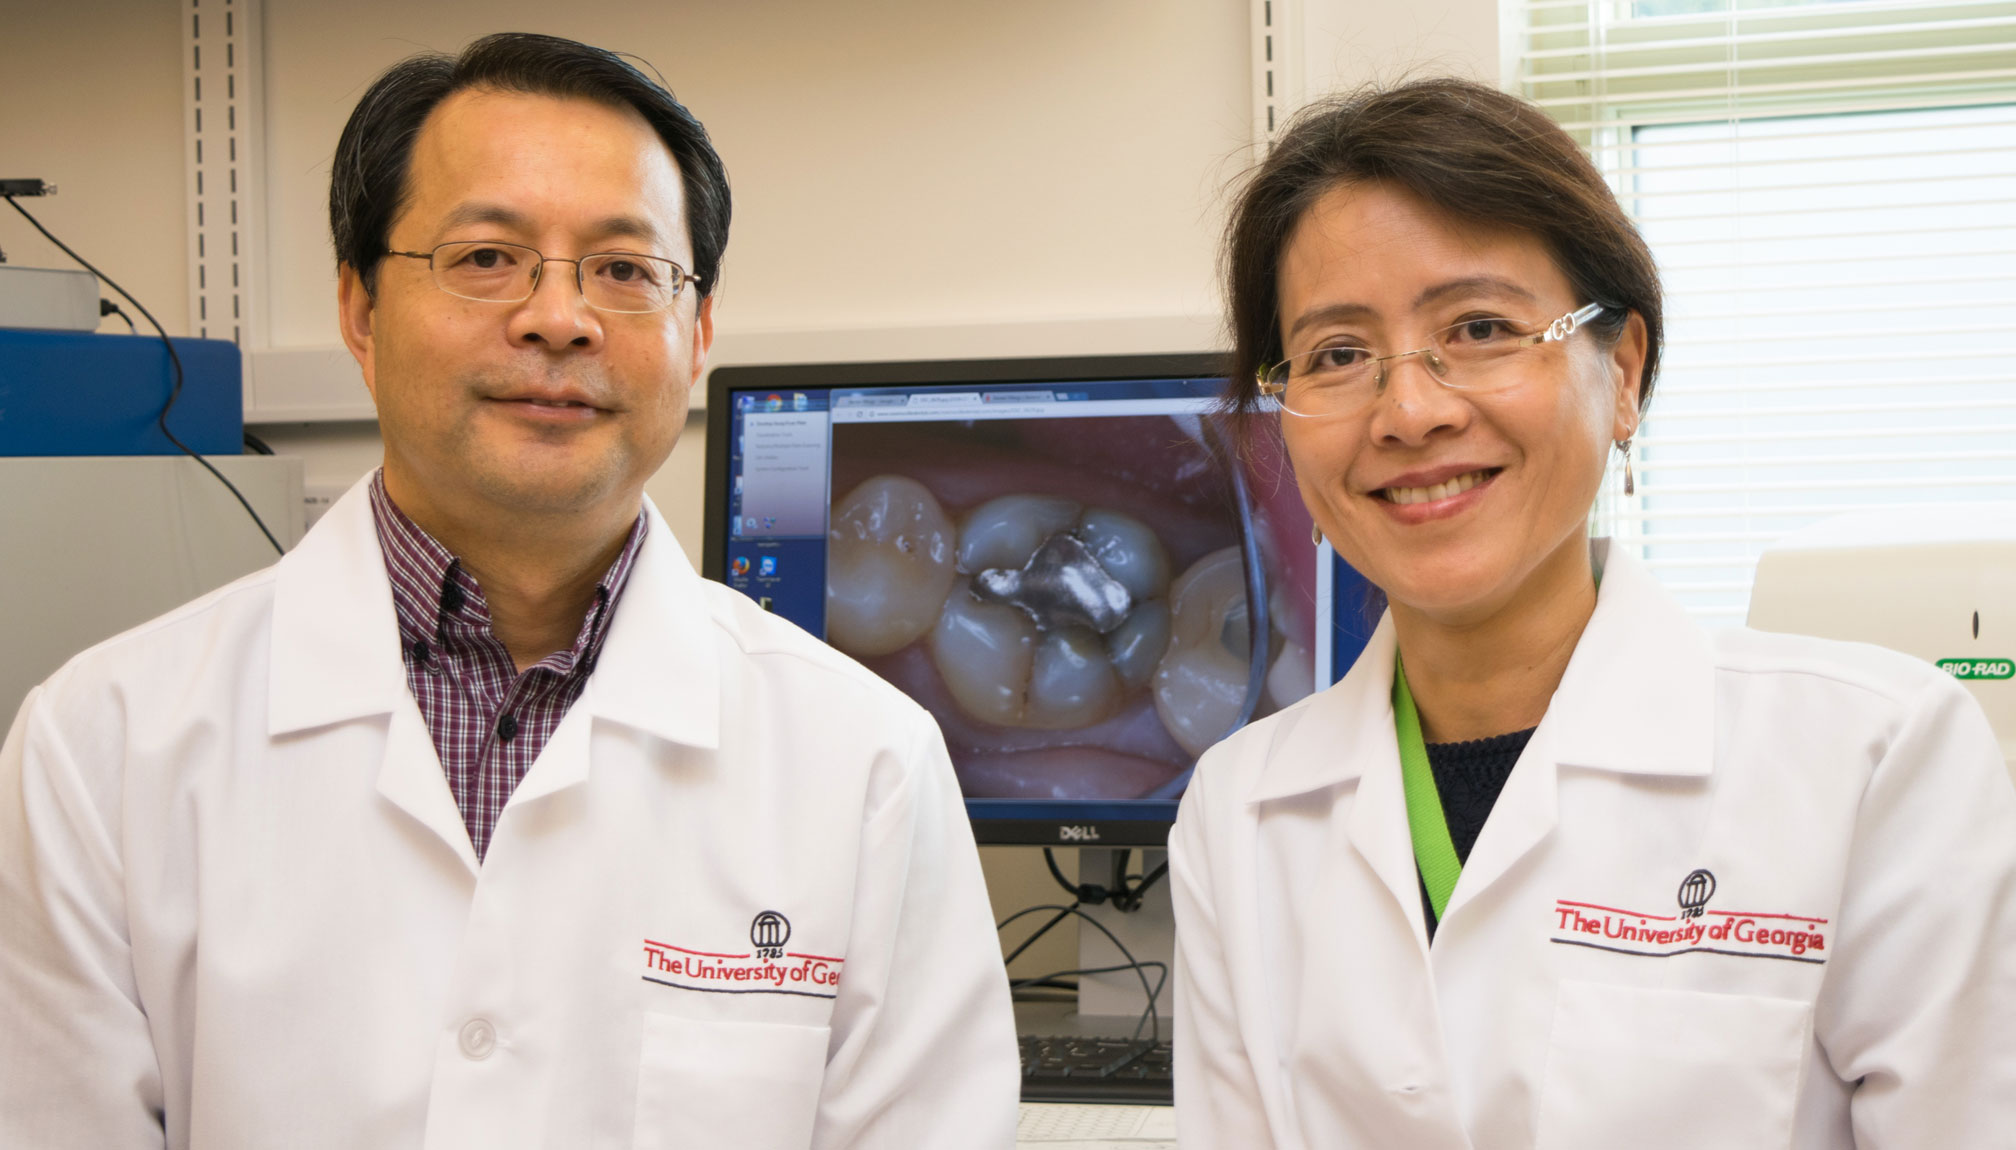 Dental surface restorations composed of dental amalgam, a mixture of mercury, silver, tin and other metals, significantly contribute to prolonged mercury levels in the body, according to new research from UGA’s College of Public Health.